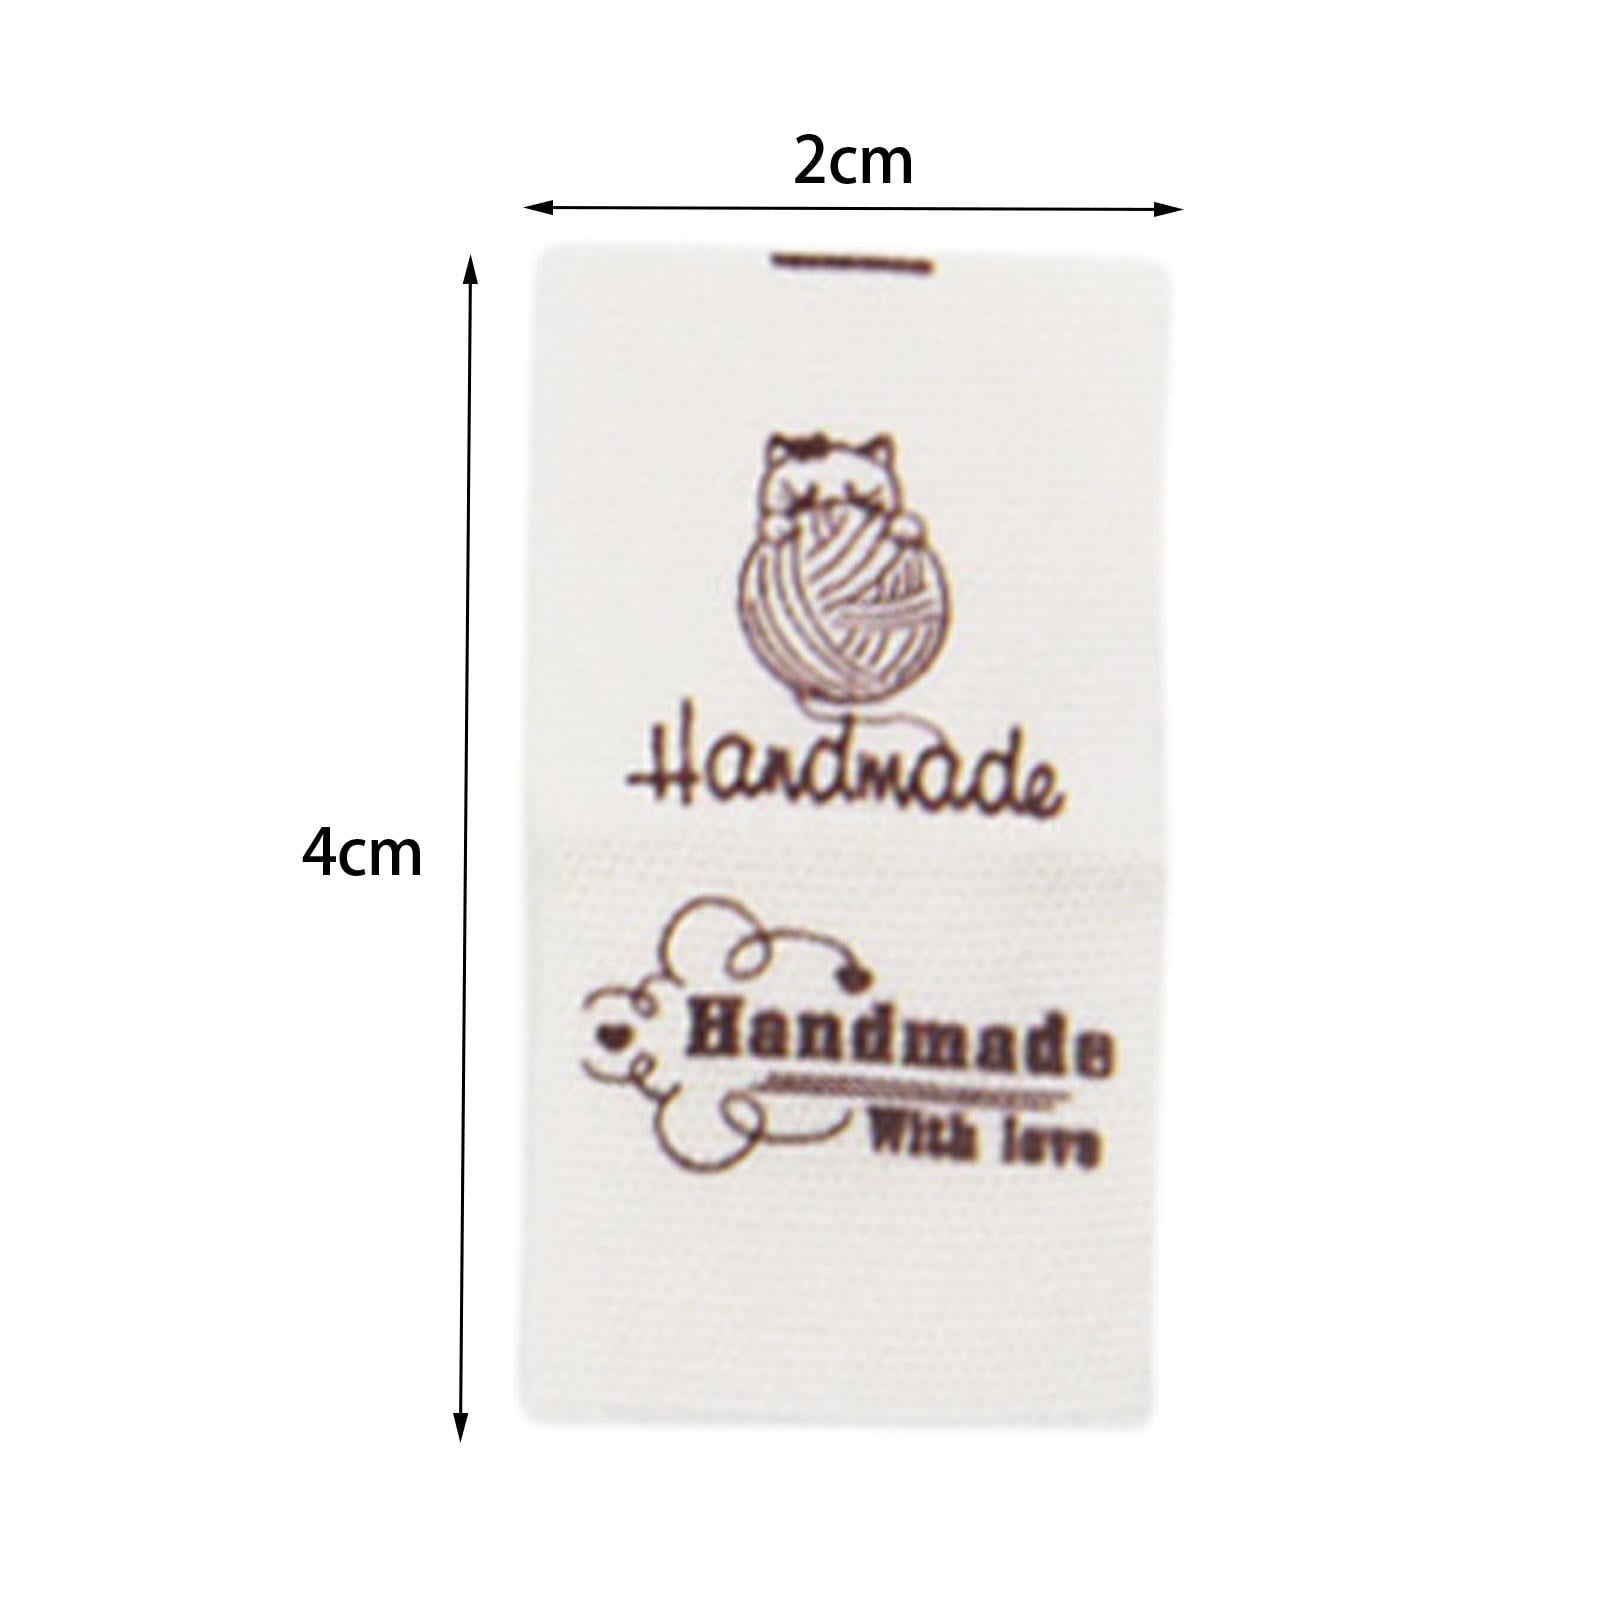 100 pcs crafting fabric tags sewing labels for handmade items Handmade With  Love